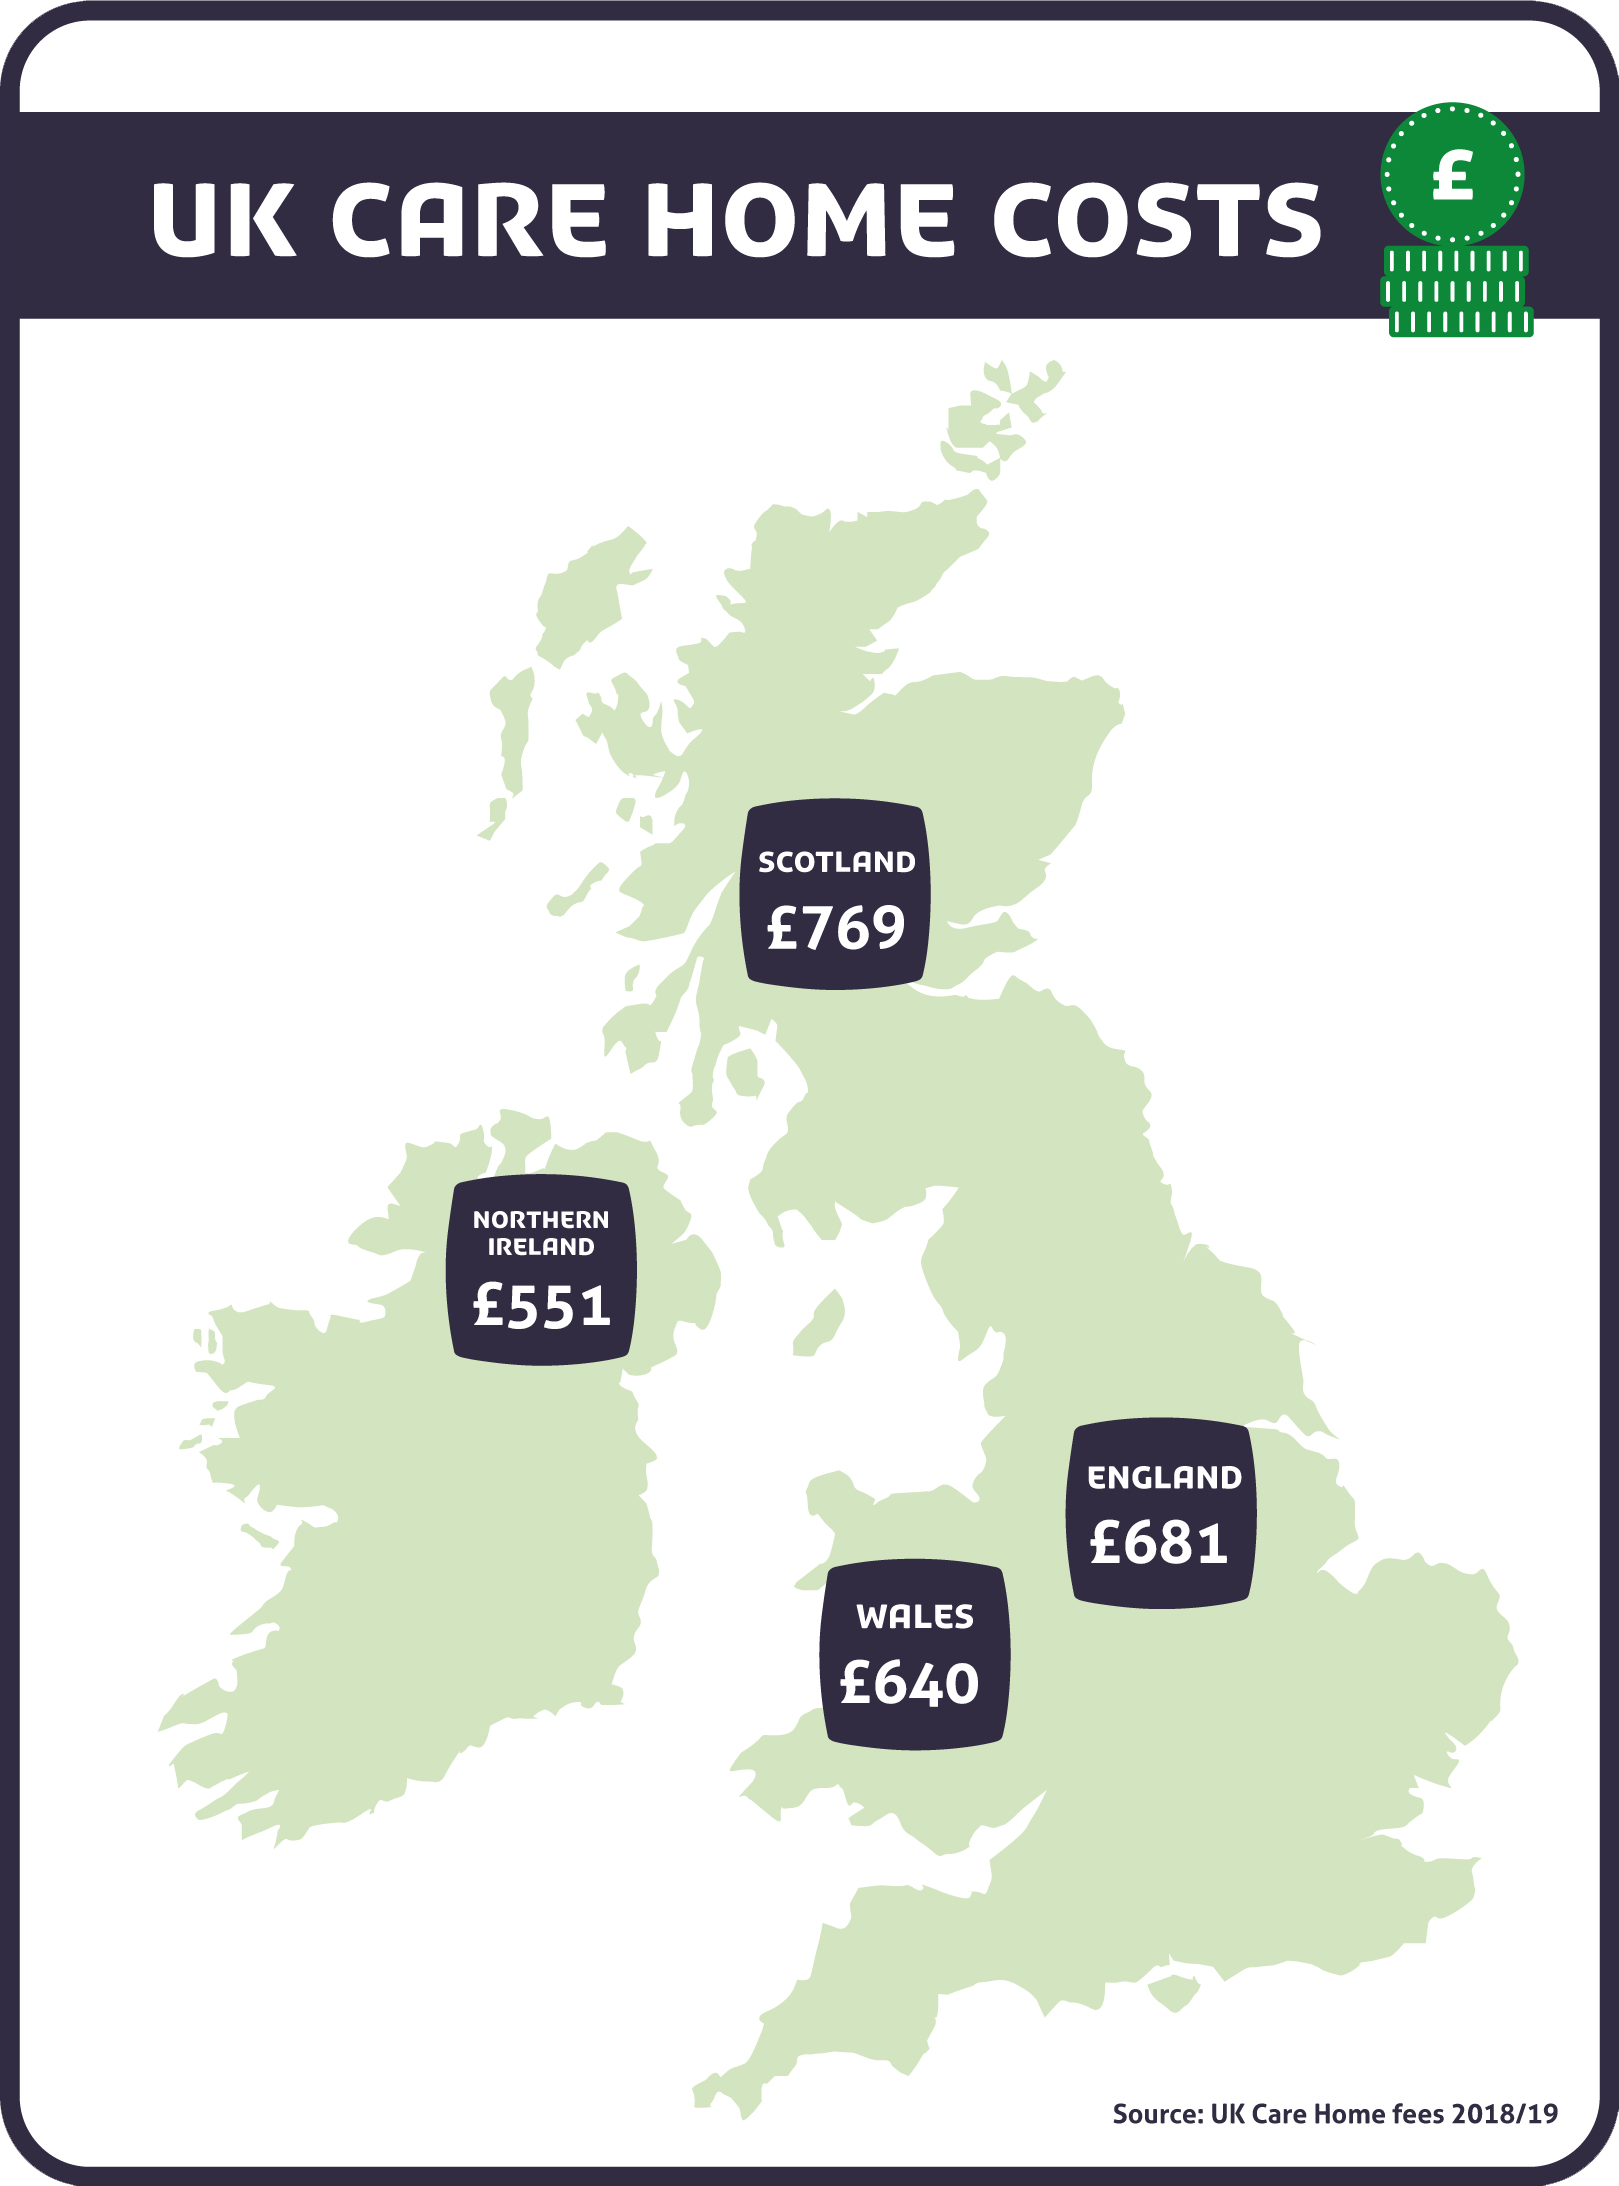 UK care home costs text says Scotland £769 Northern Ireland £551 Wales £640 and England £681 Source UK Care Home Fees 2018/19